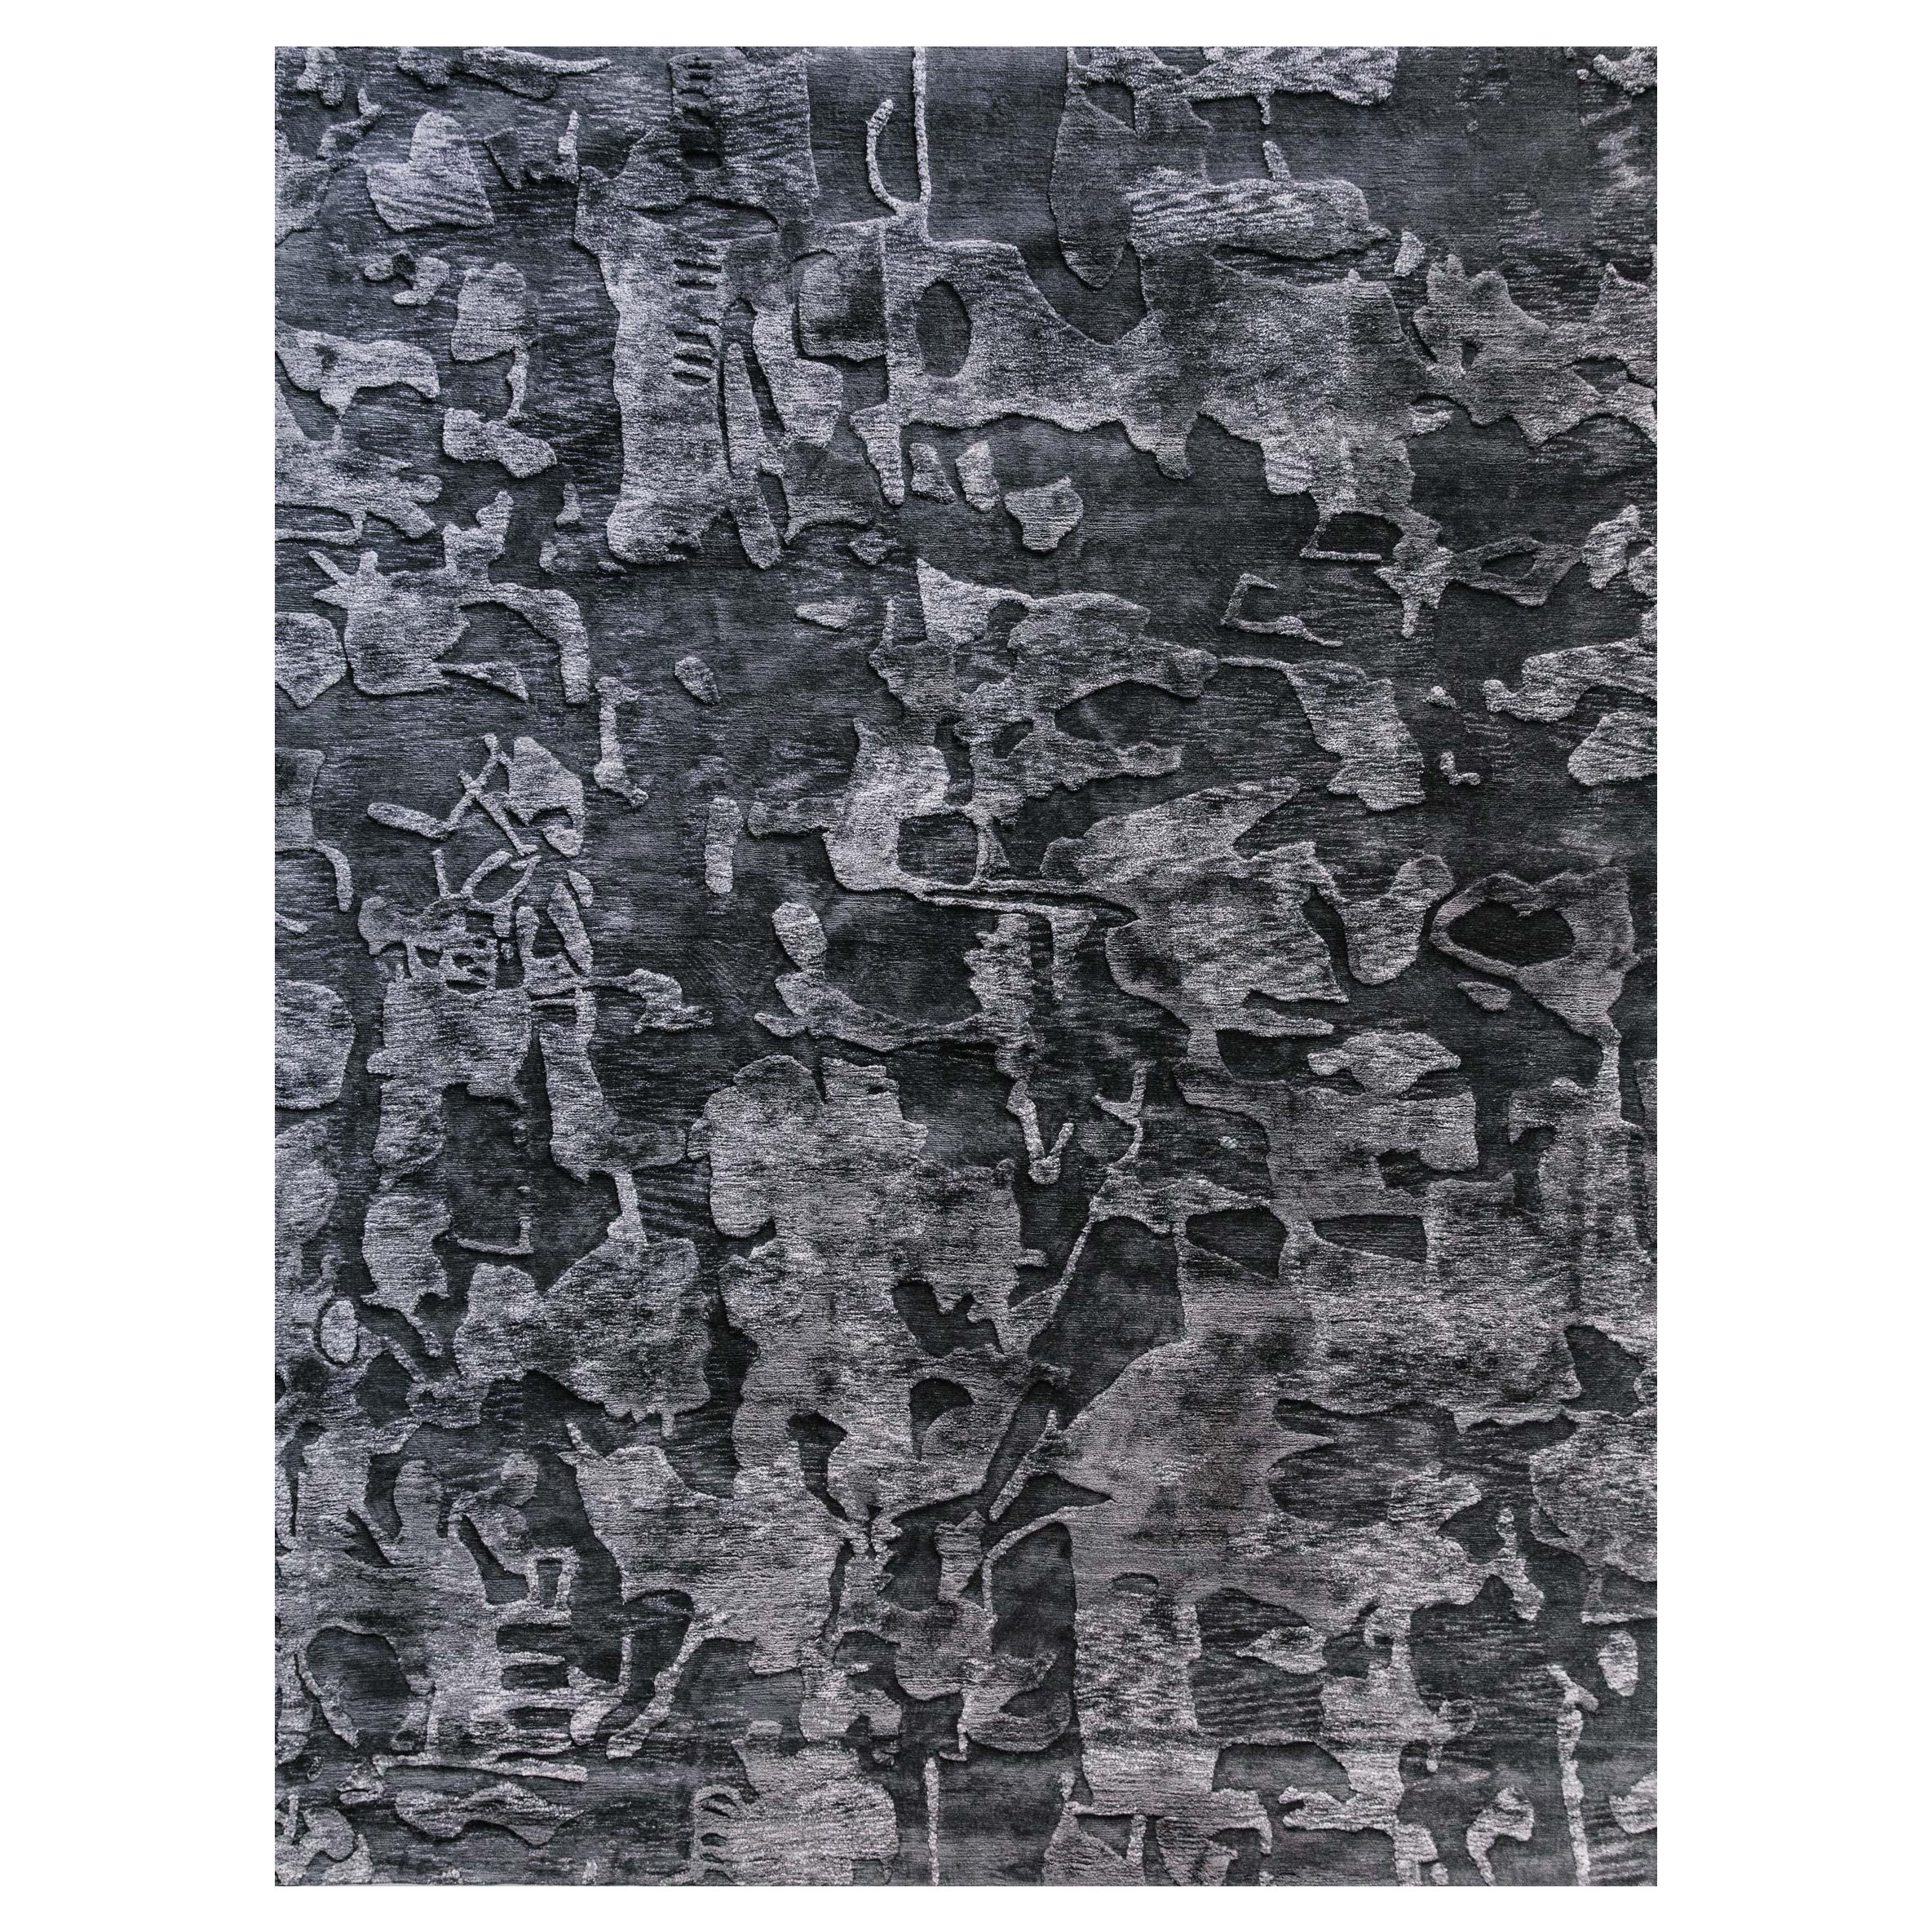 Tonal Stardust Hand Knotted Rug by Eskayel